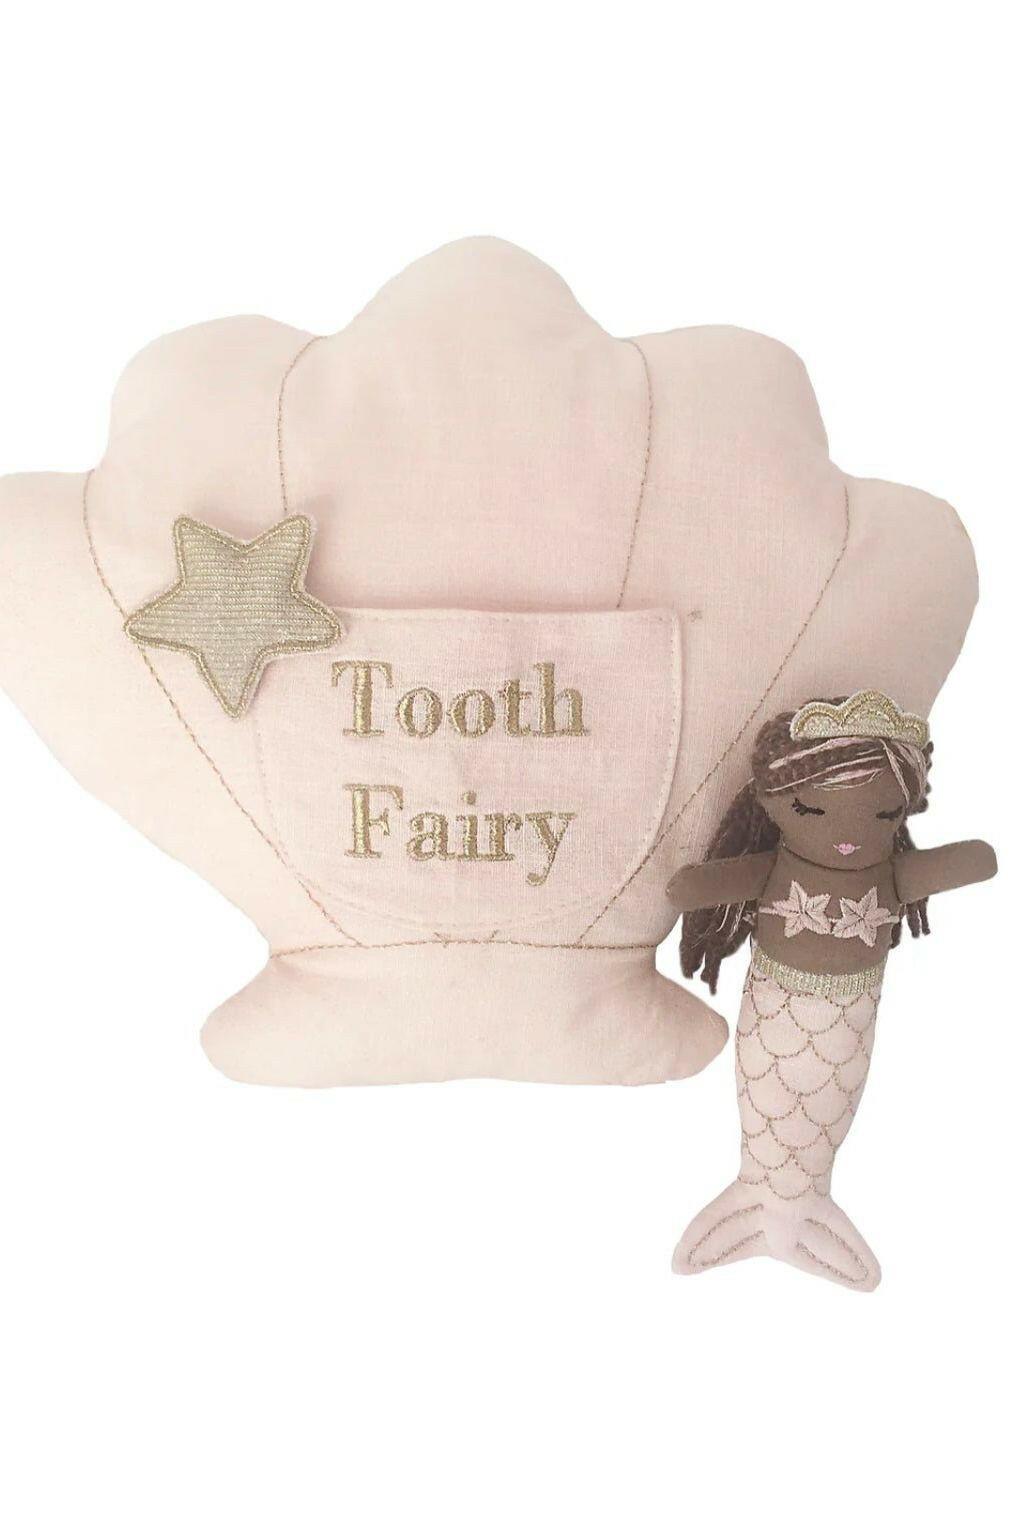 15-mermaid-shell-tooth-fairy-pillow-macie-the-tooth-fairy-guardian-sophia-rose-children-s-boutique-1 - Sophia Rose Children's Boutique